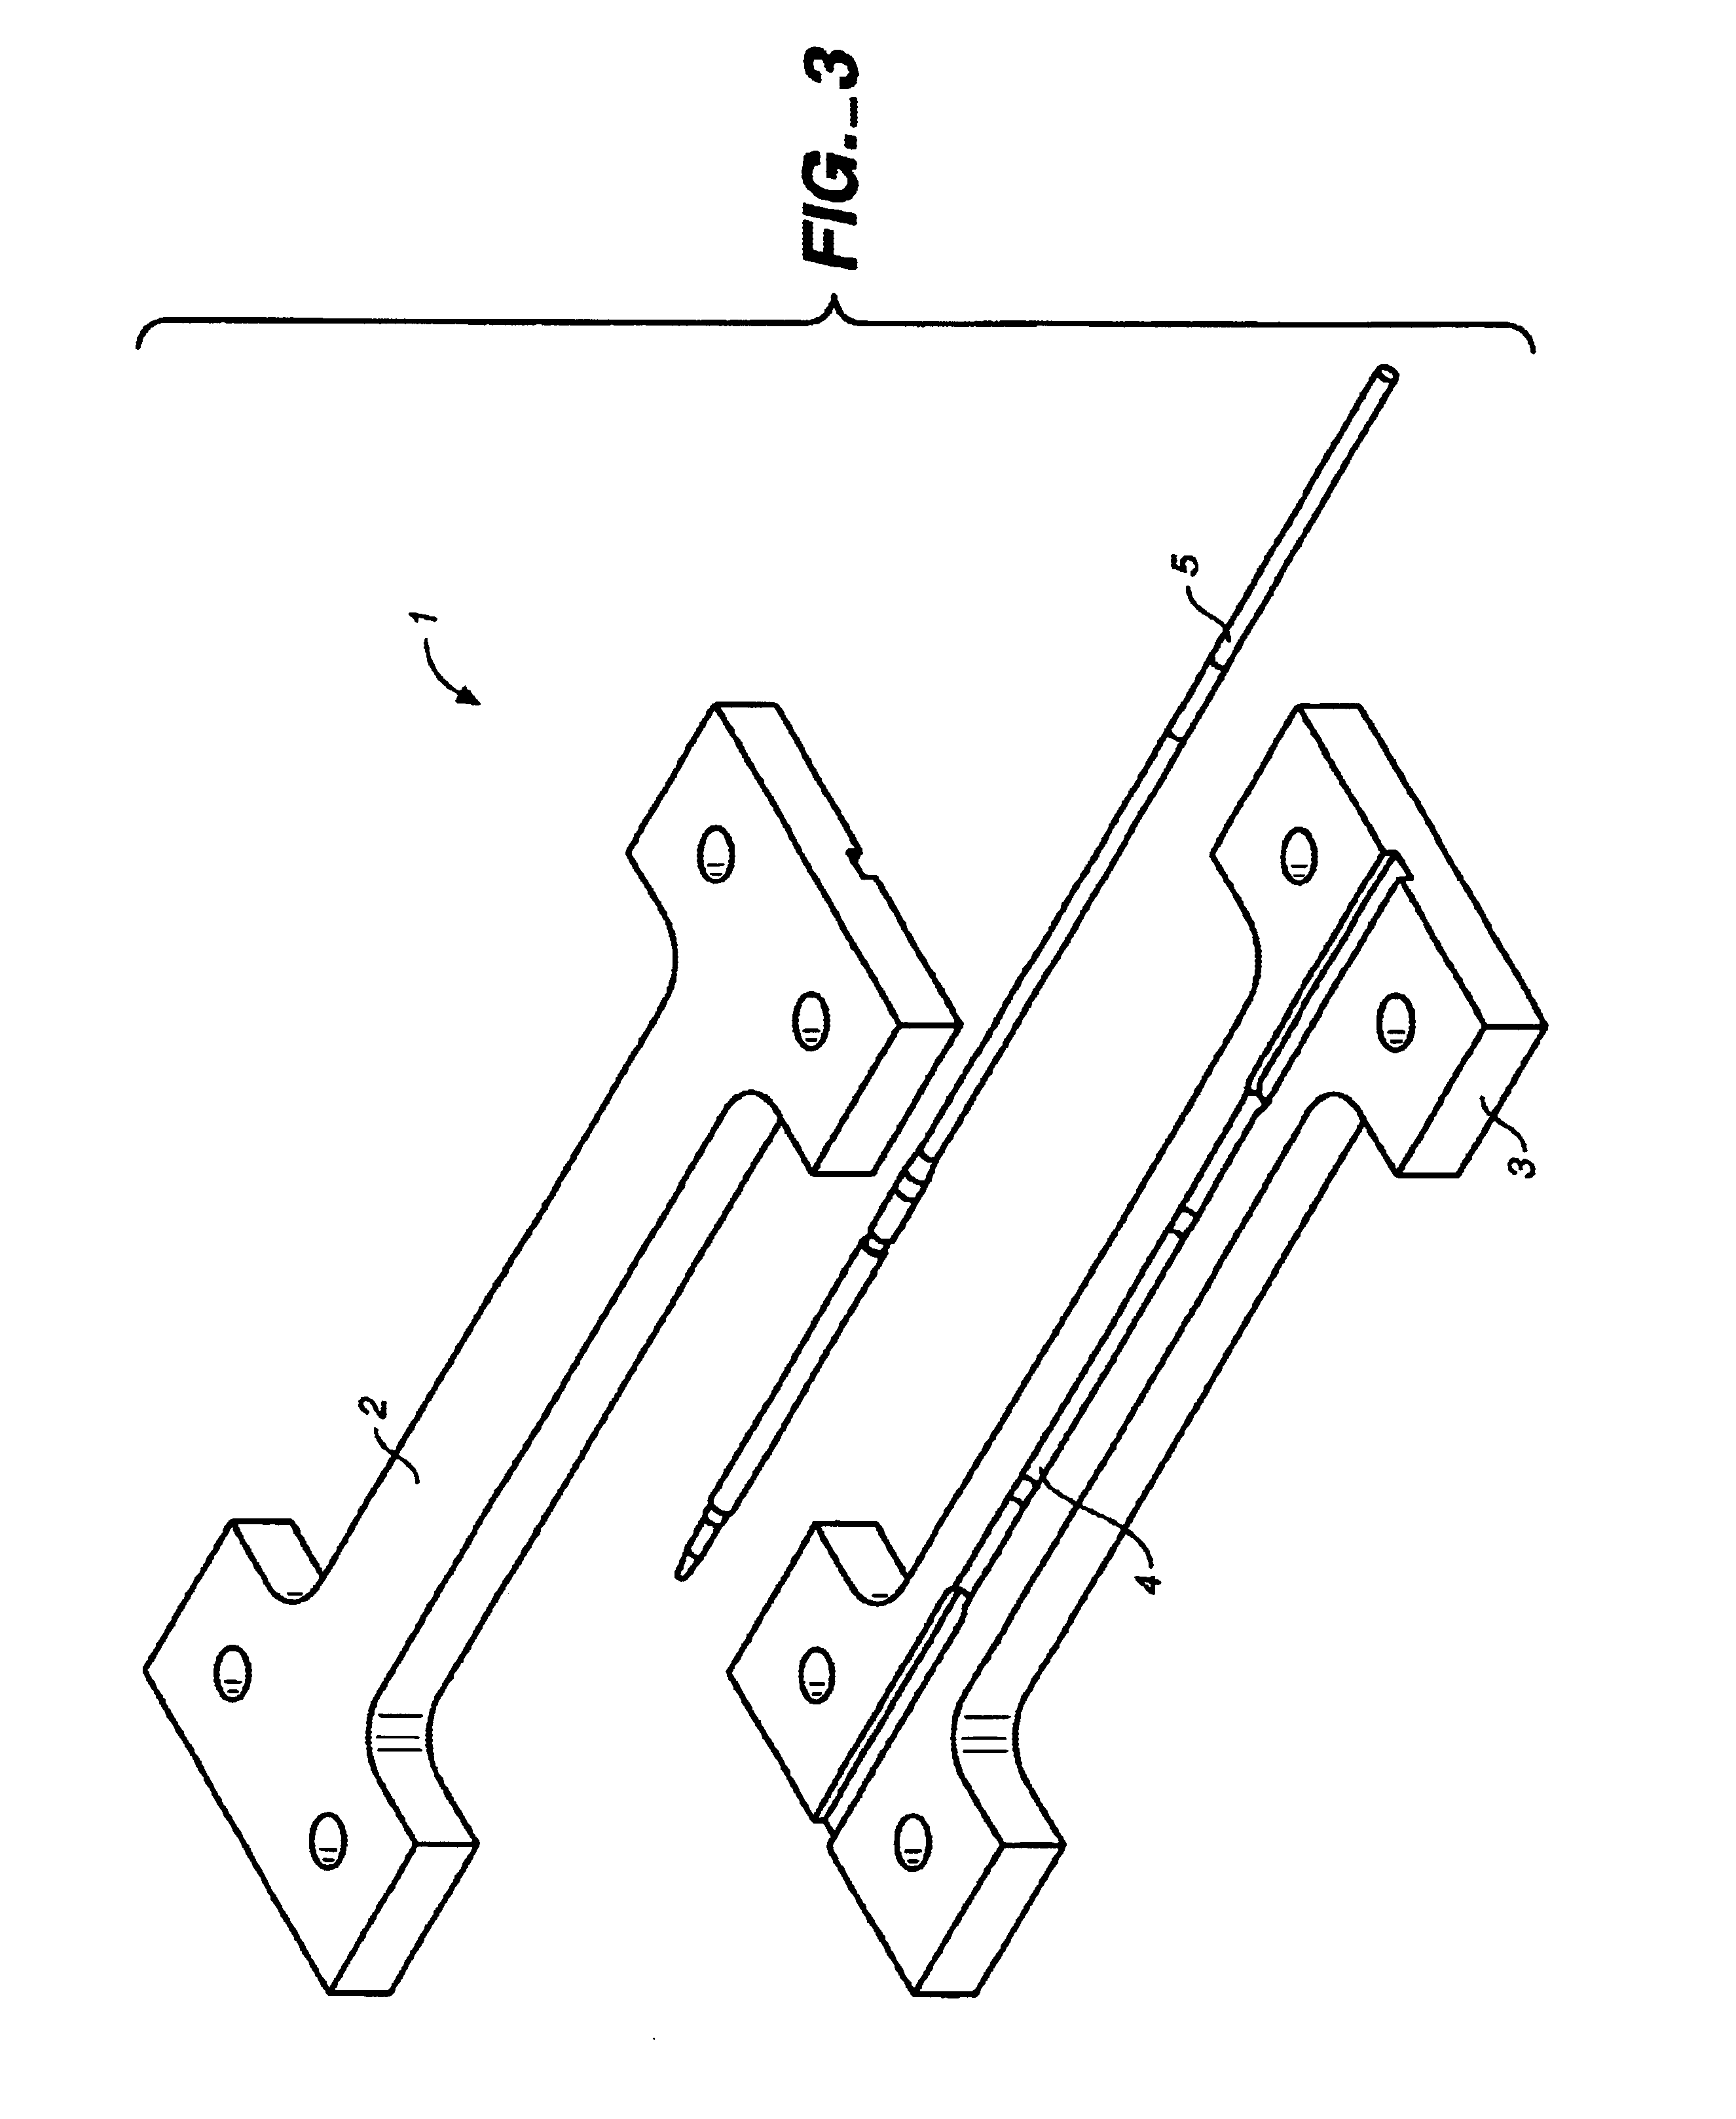 Apparatus for mounting a stent onto a stent delivery system